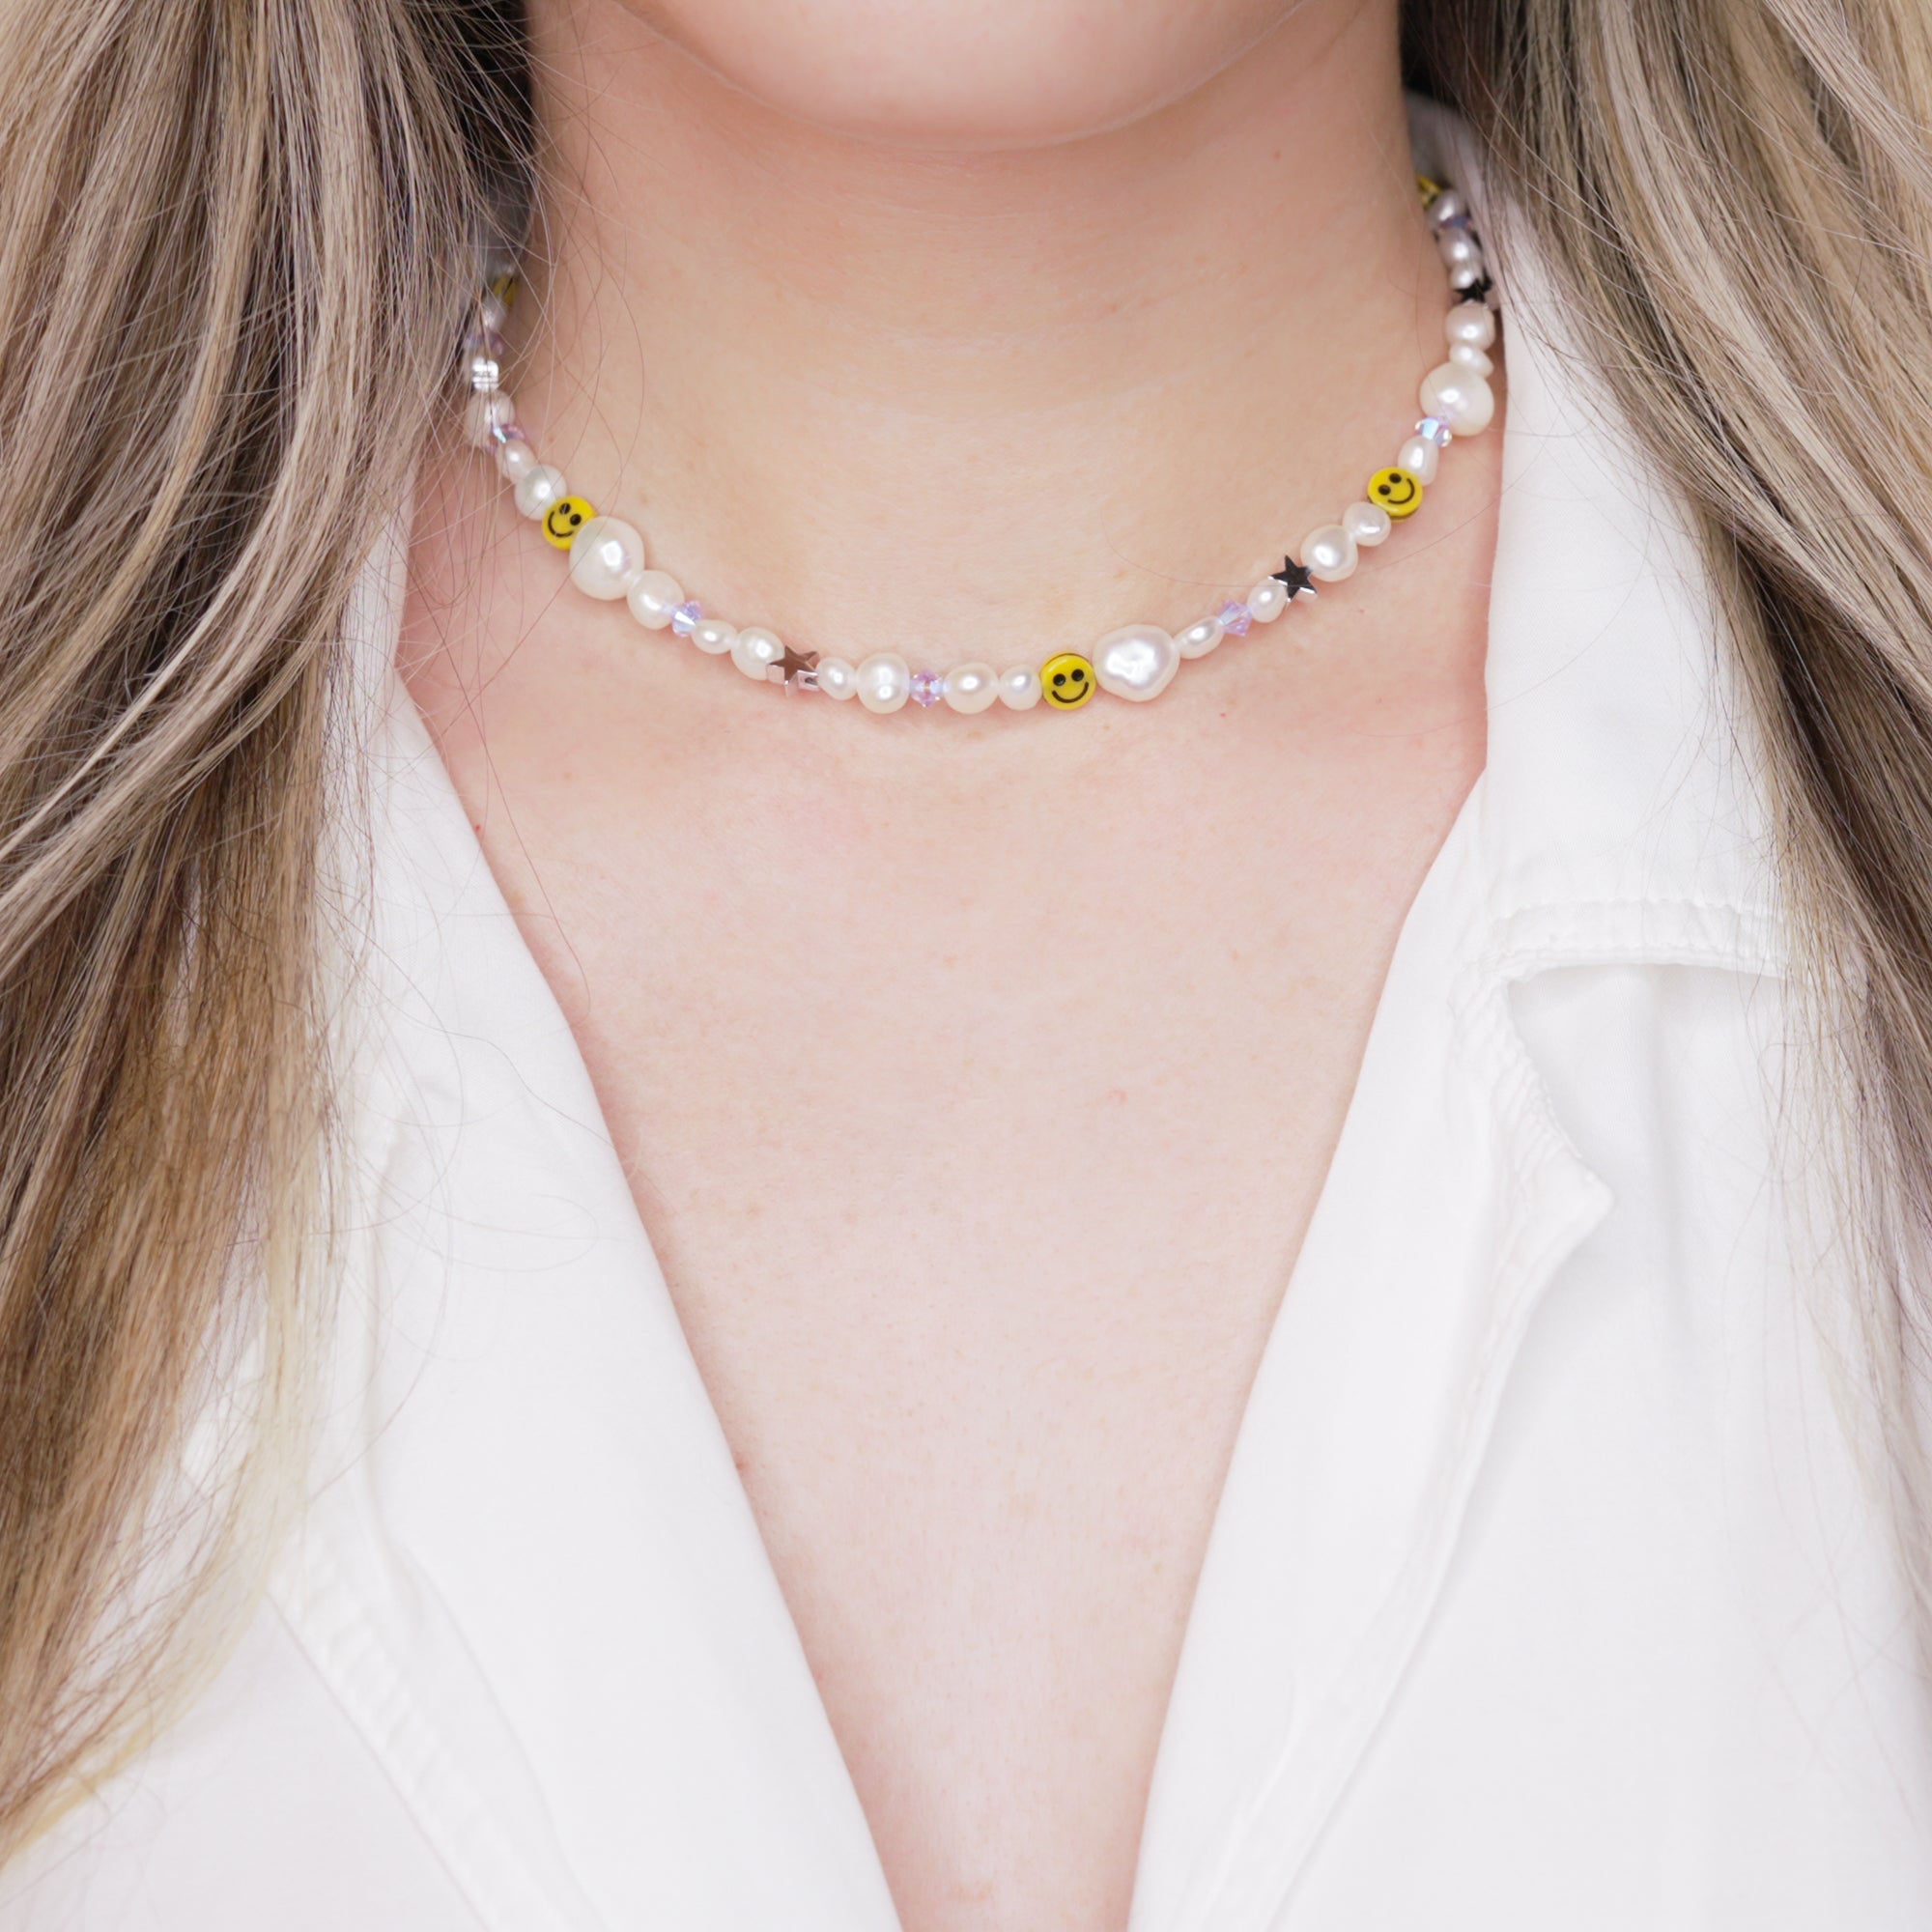 All Smiles Necklace – Joolz by Martha Calvo